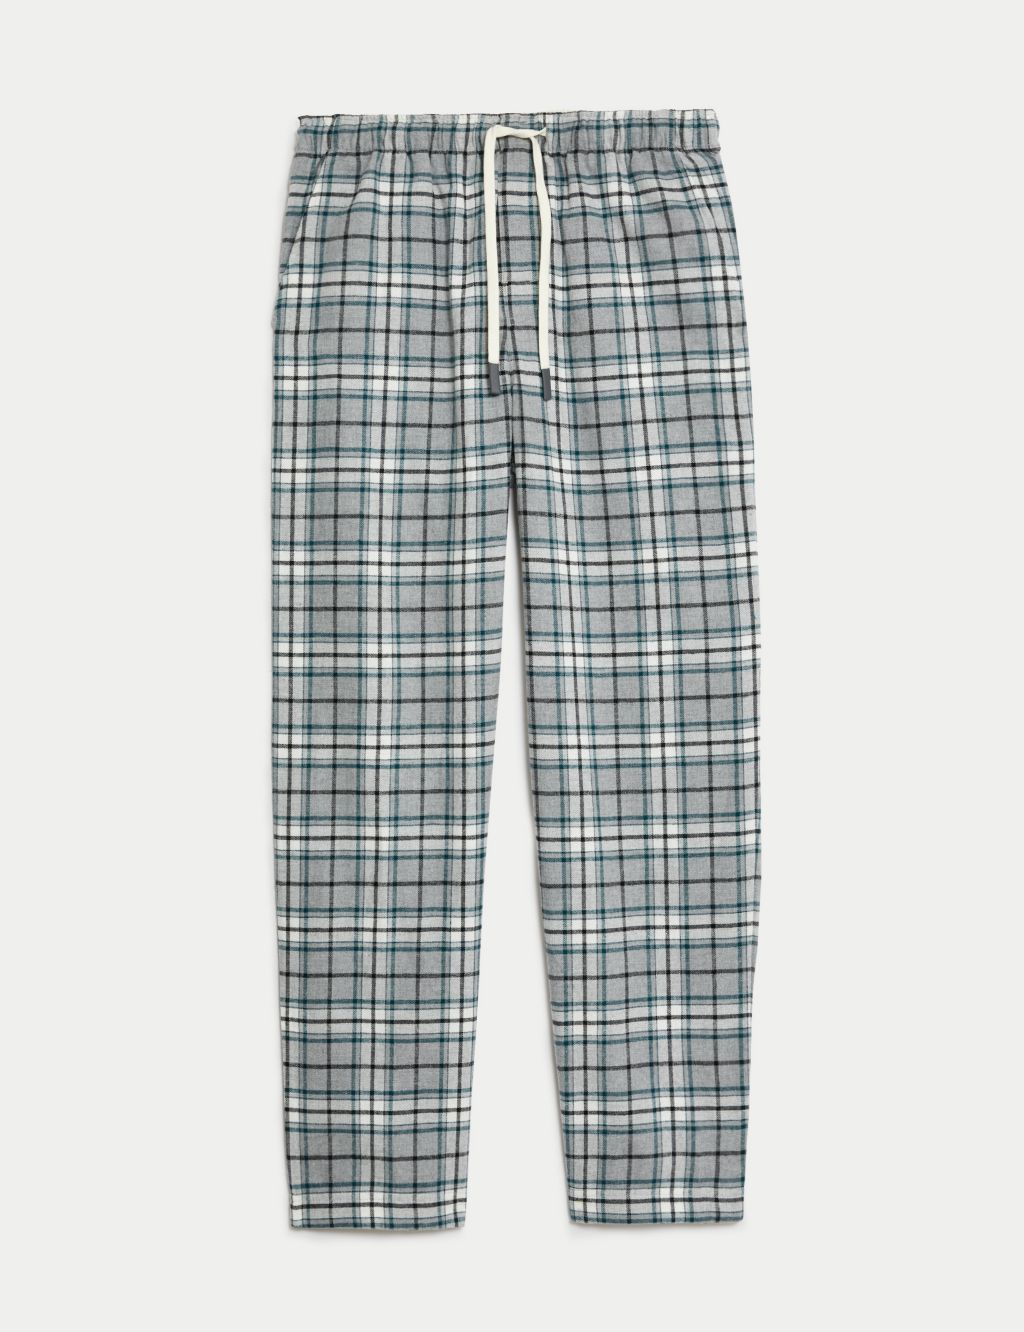 Brushed Cotton Checked Loungewear Bottoms image 2